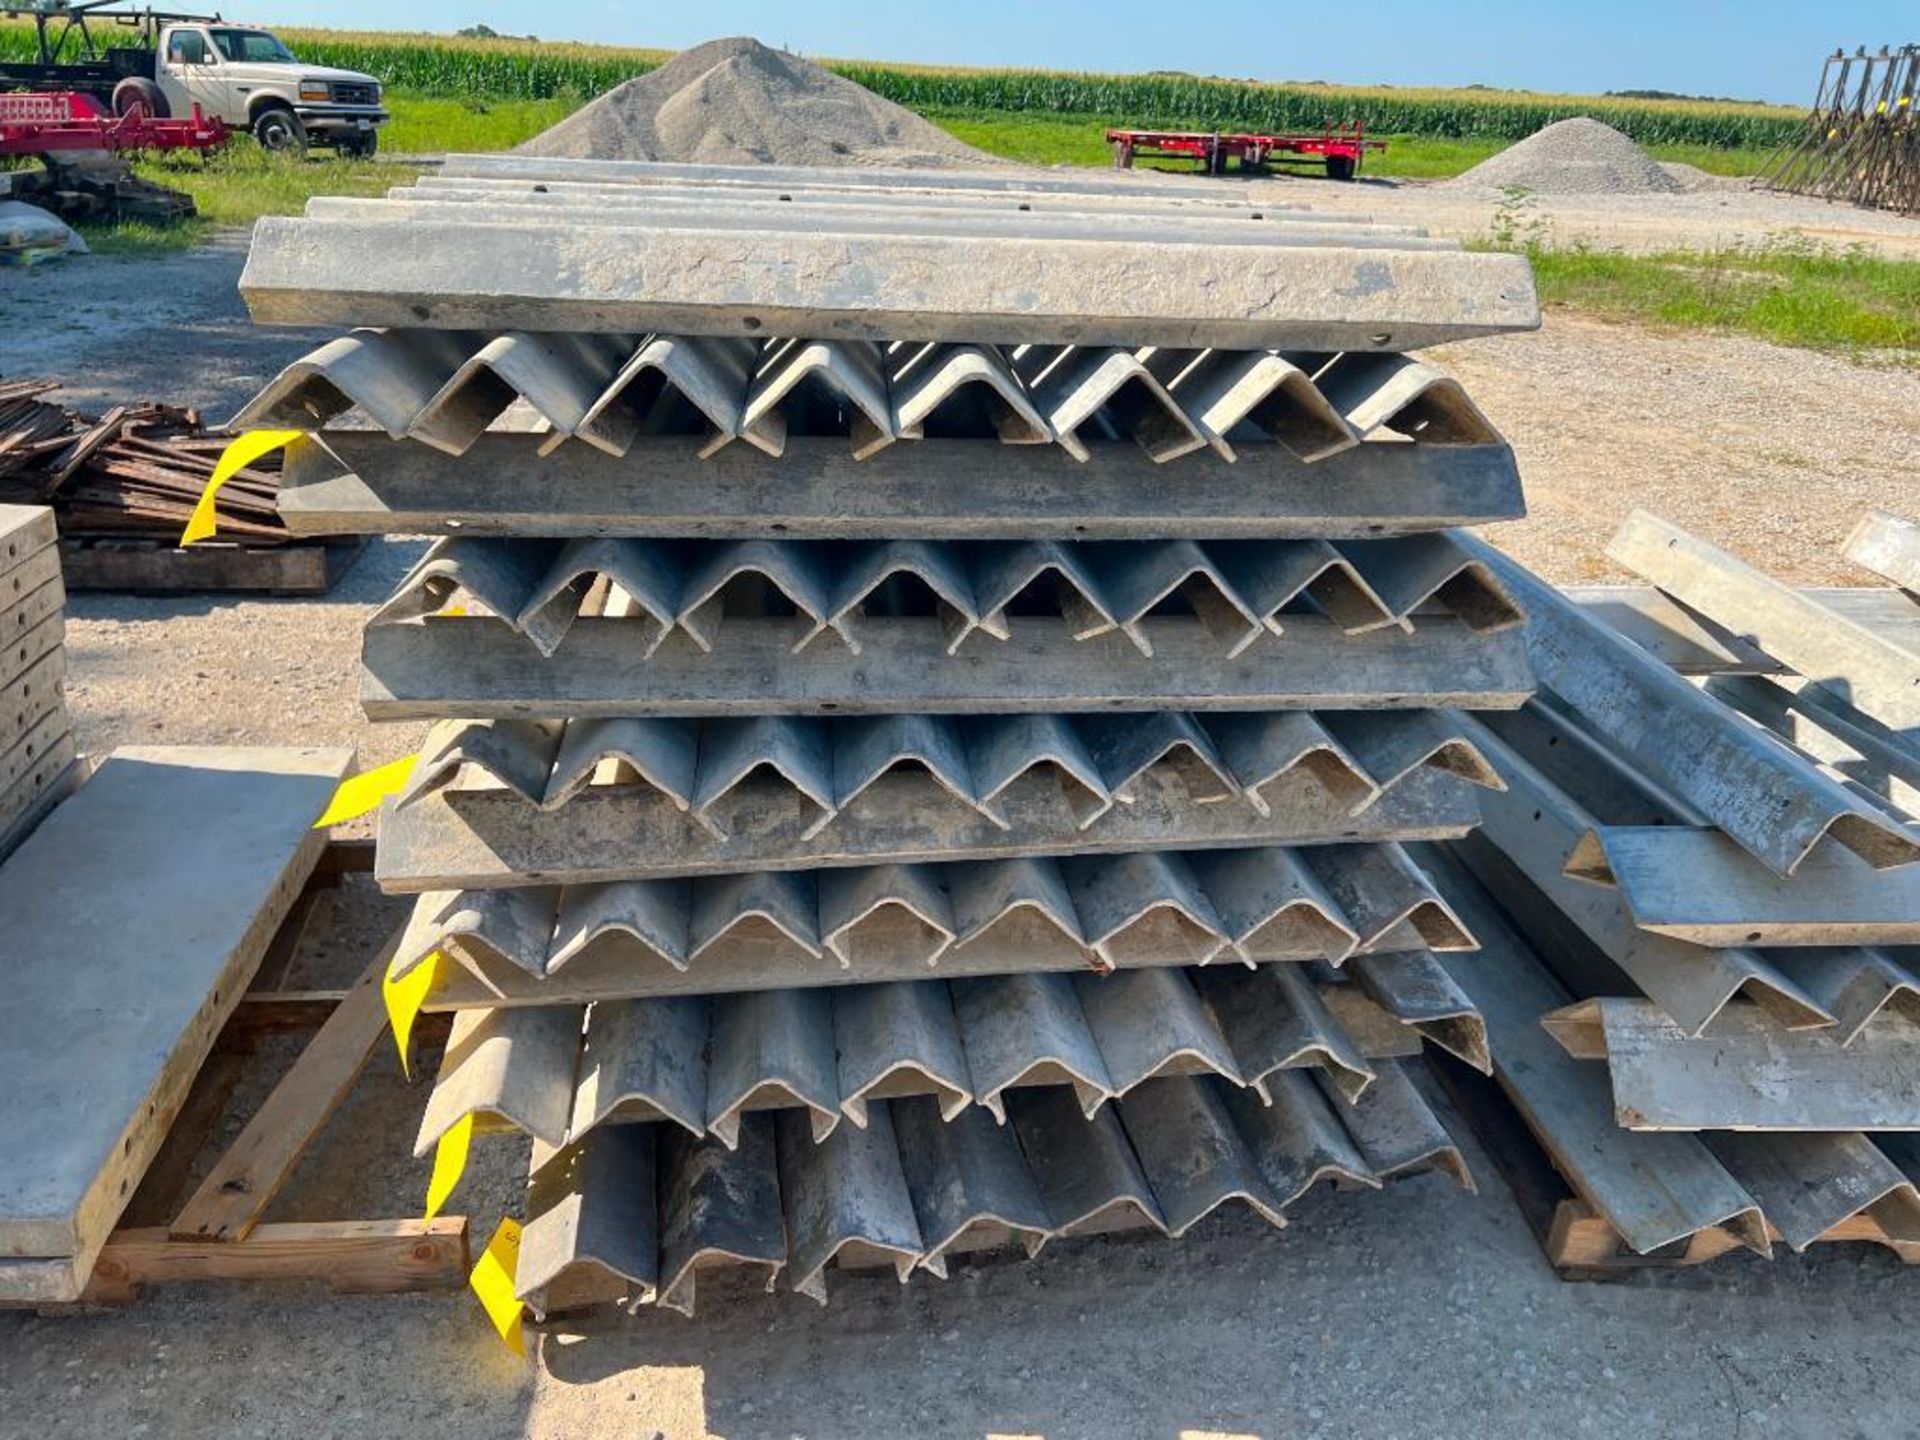 (10) 4"x 4" x 4' ISC Wall Ties Aluminum Concrete Forms, 6-12 Hole Pattern. Located in Altamont, IL - Image 2 of 3